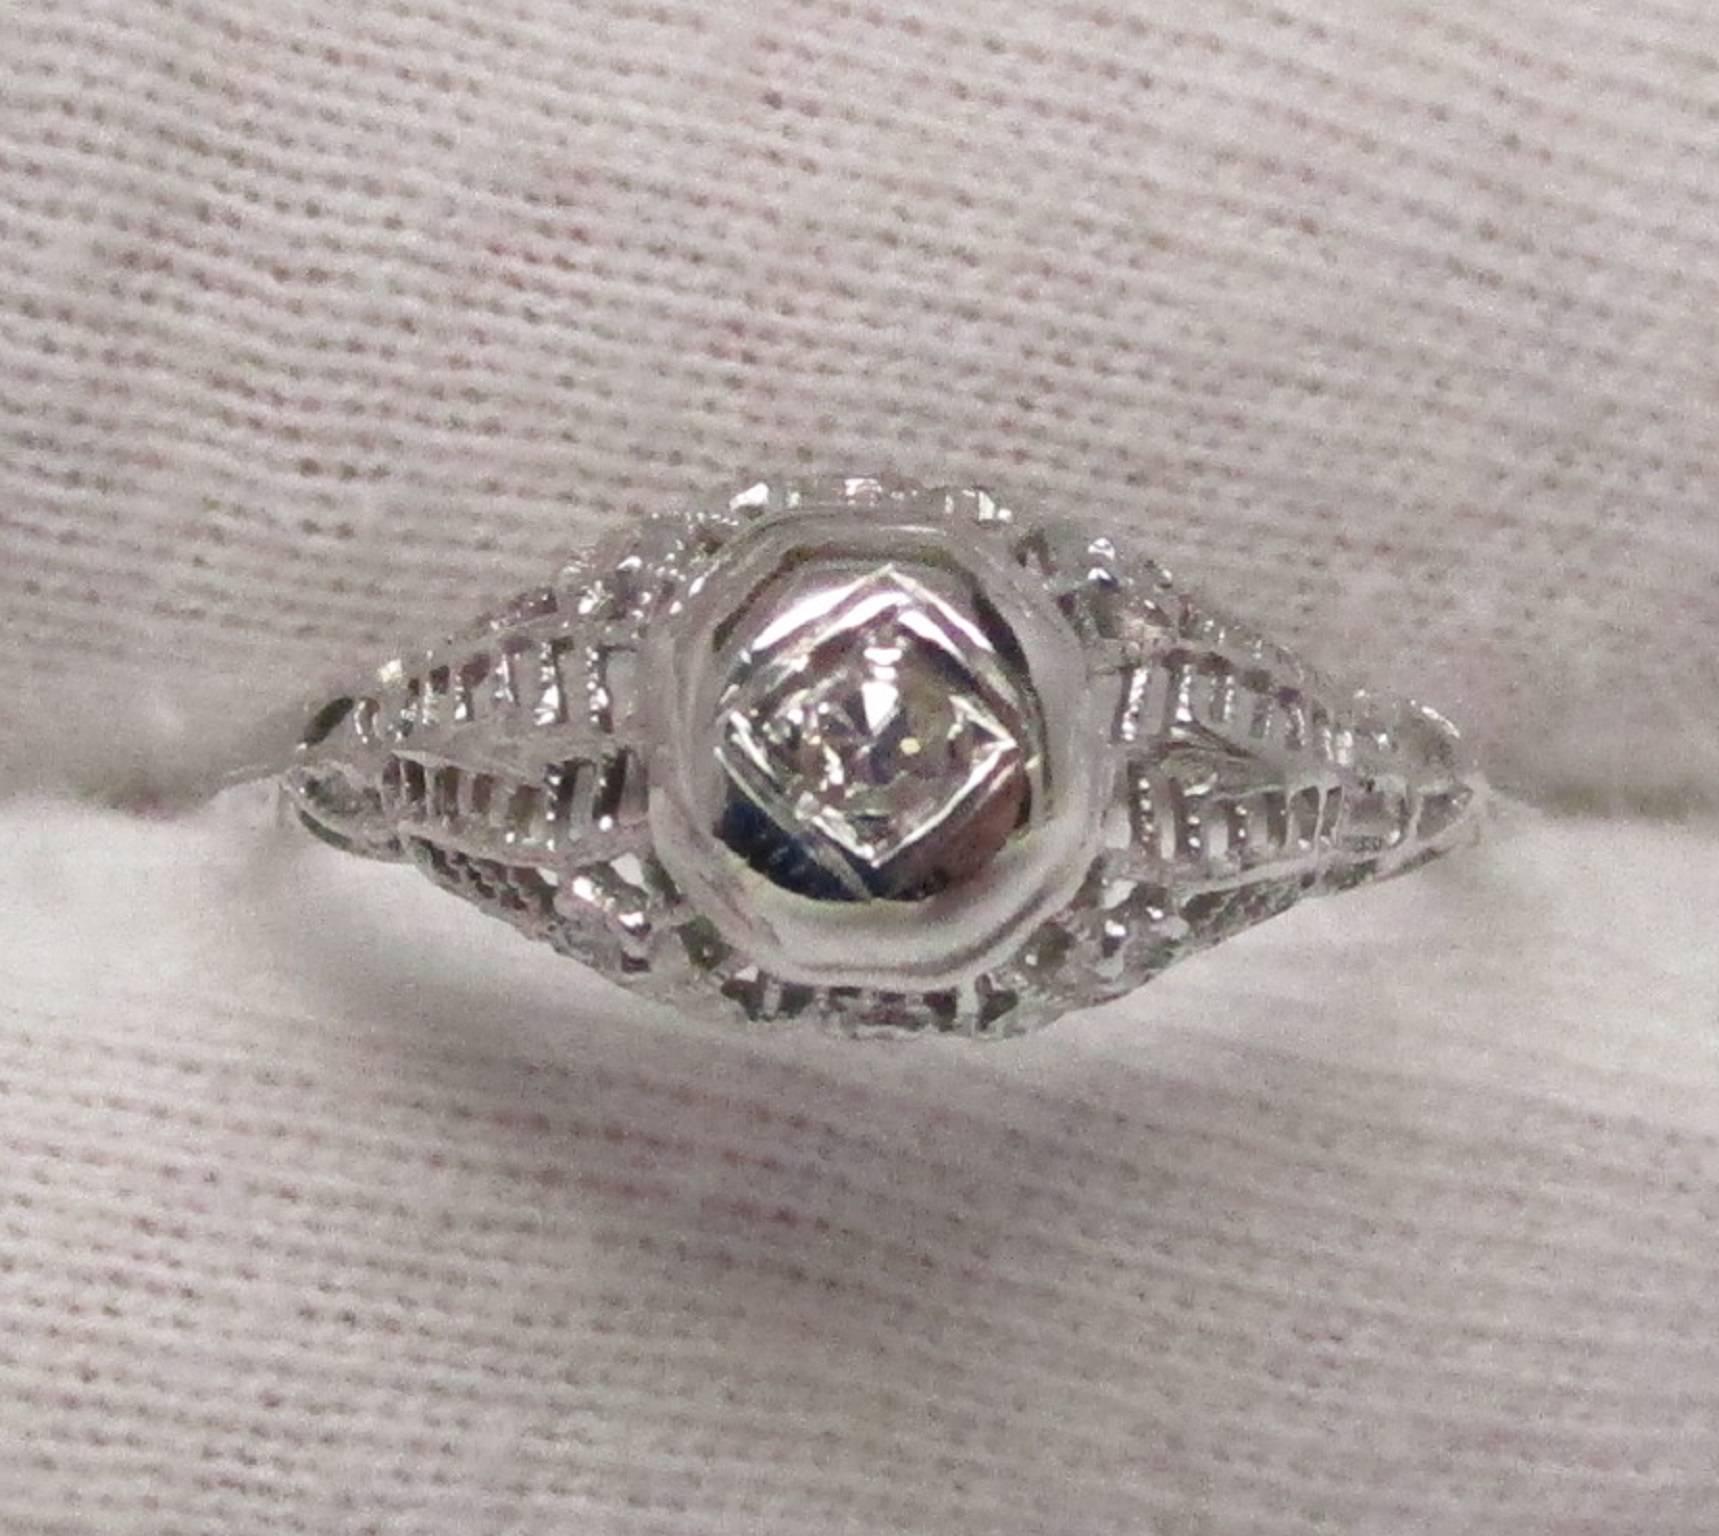 This stunning 18K white gold ring has everything you would want in a c. 1925 Art Deco Filigree diamond engagement ring. The ring is clean and crisp, showing no signs of wear. The 0.10ct diamond adds just the right amount of flash to be noticed, with